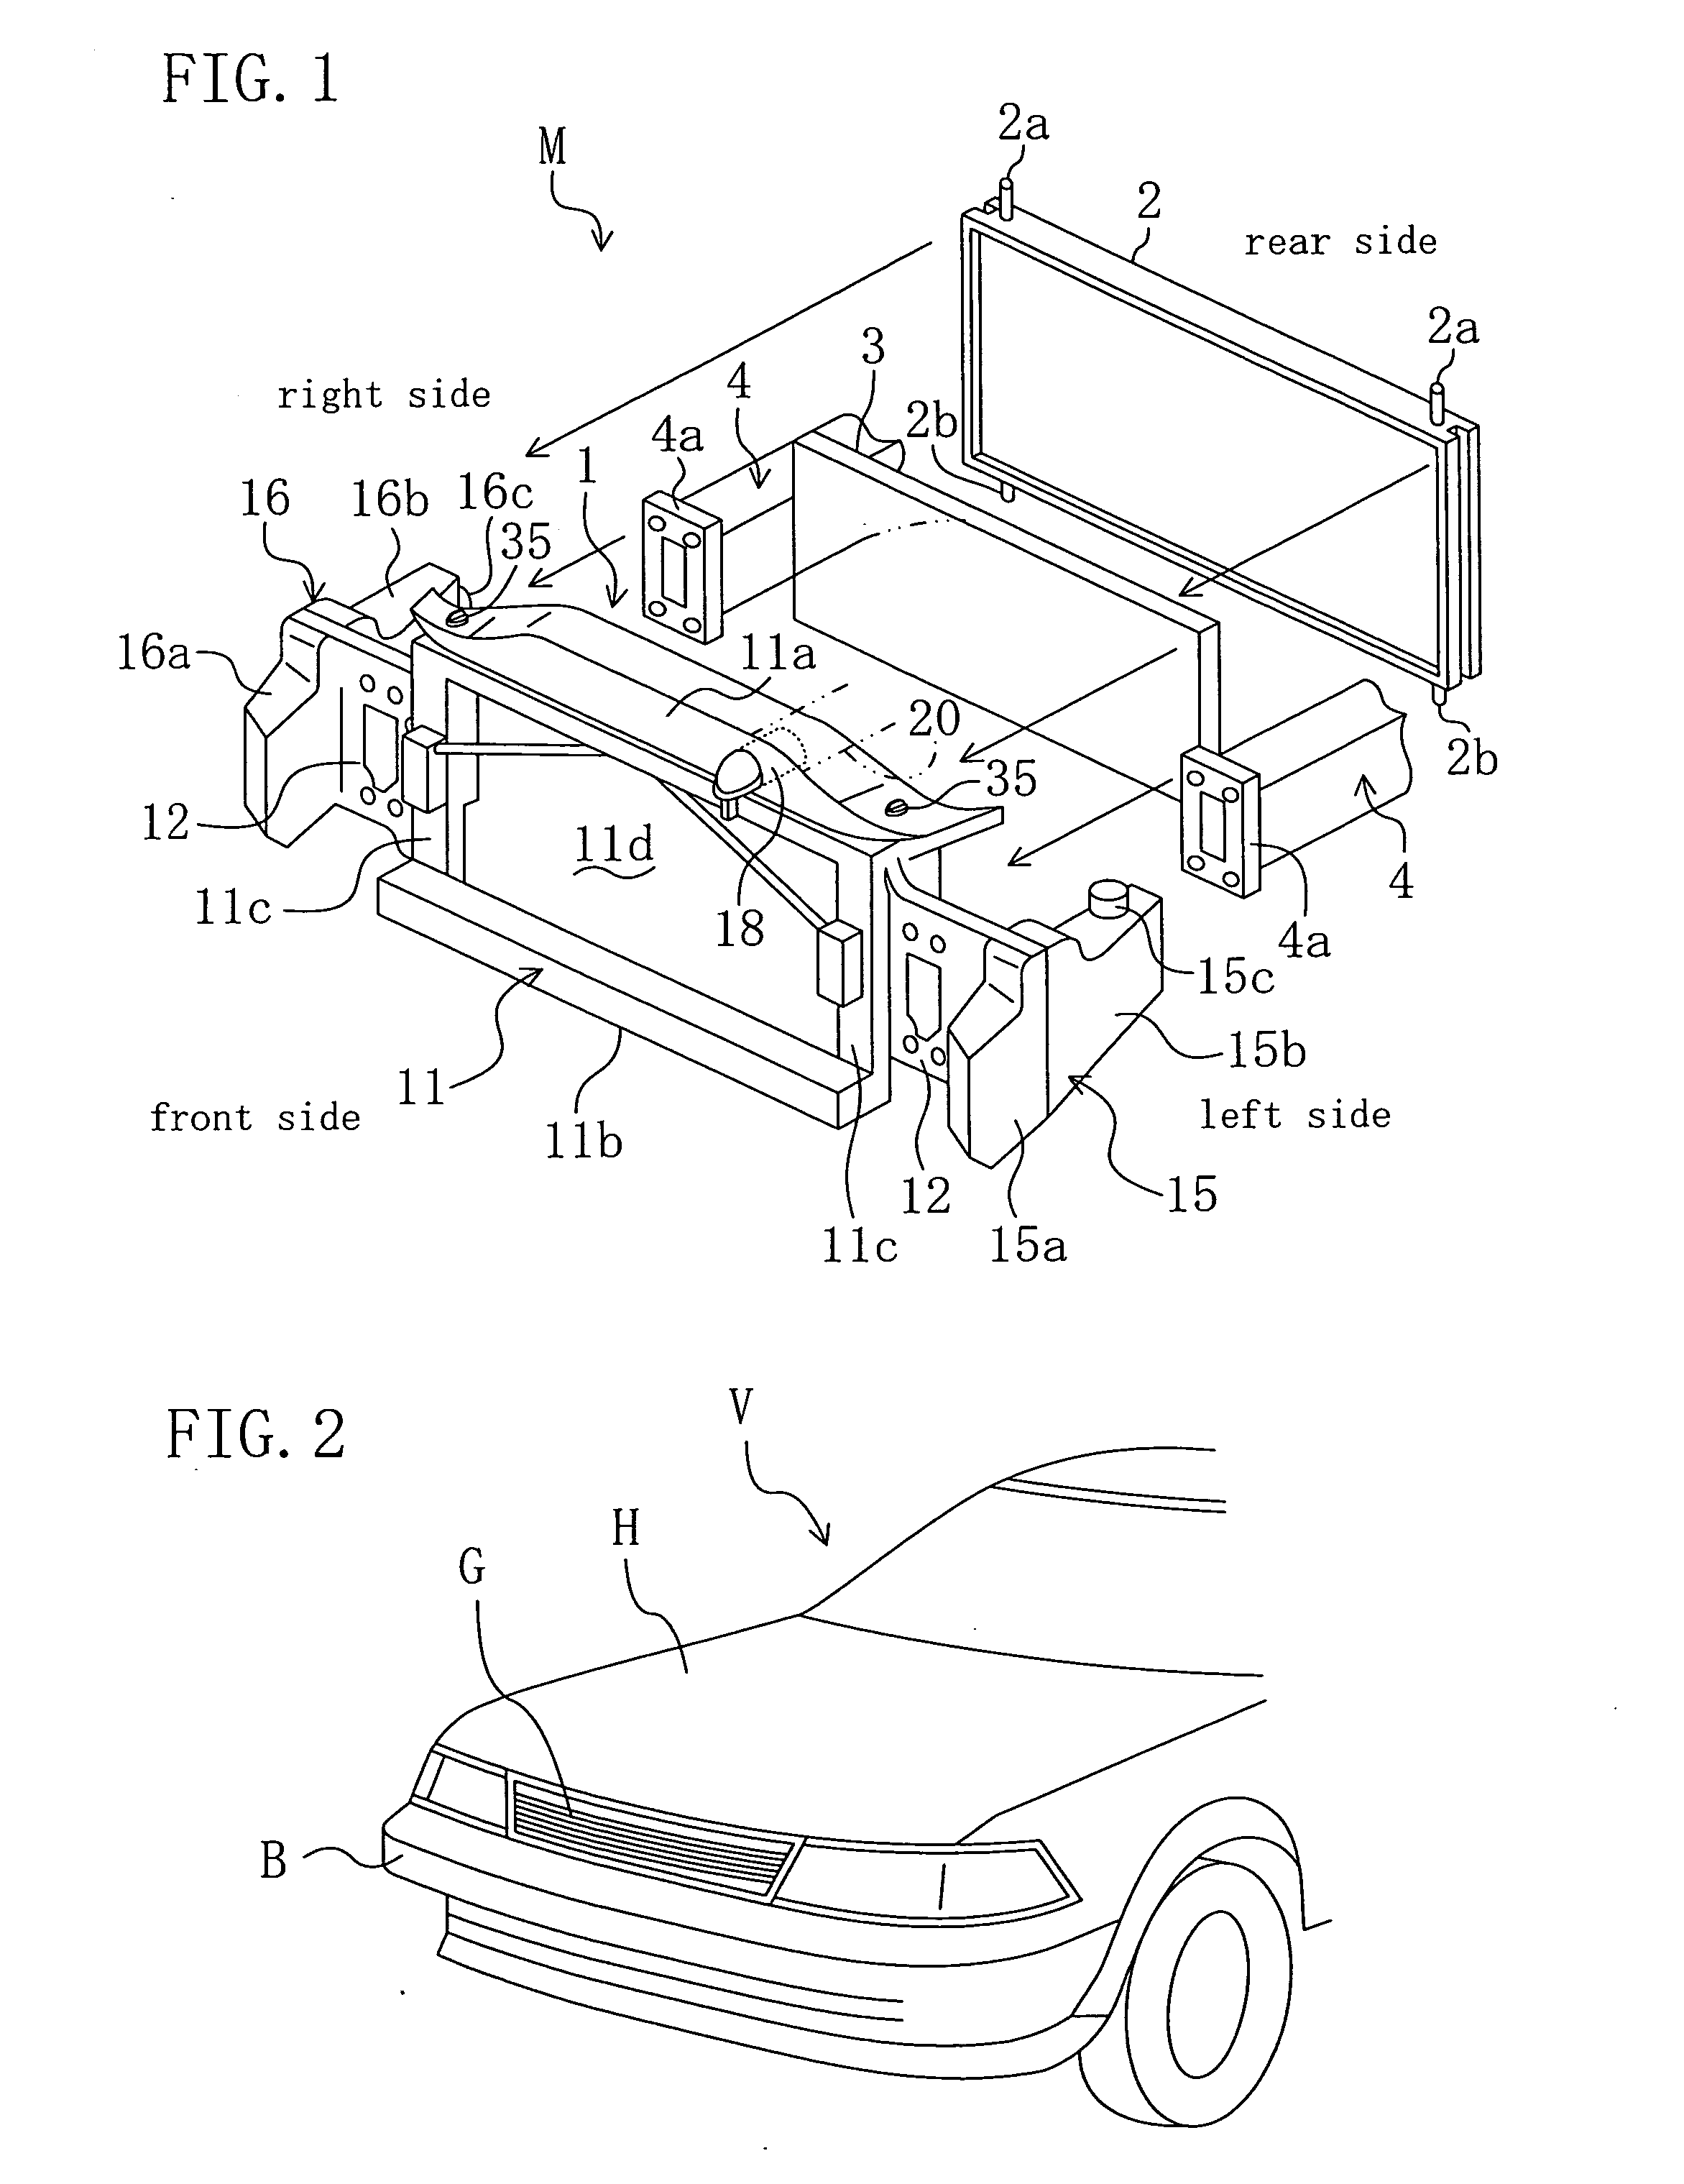 Vehicle front end structure